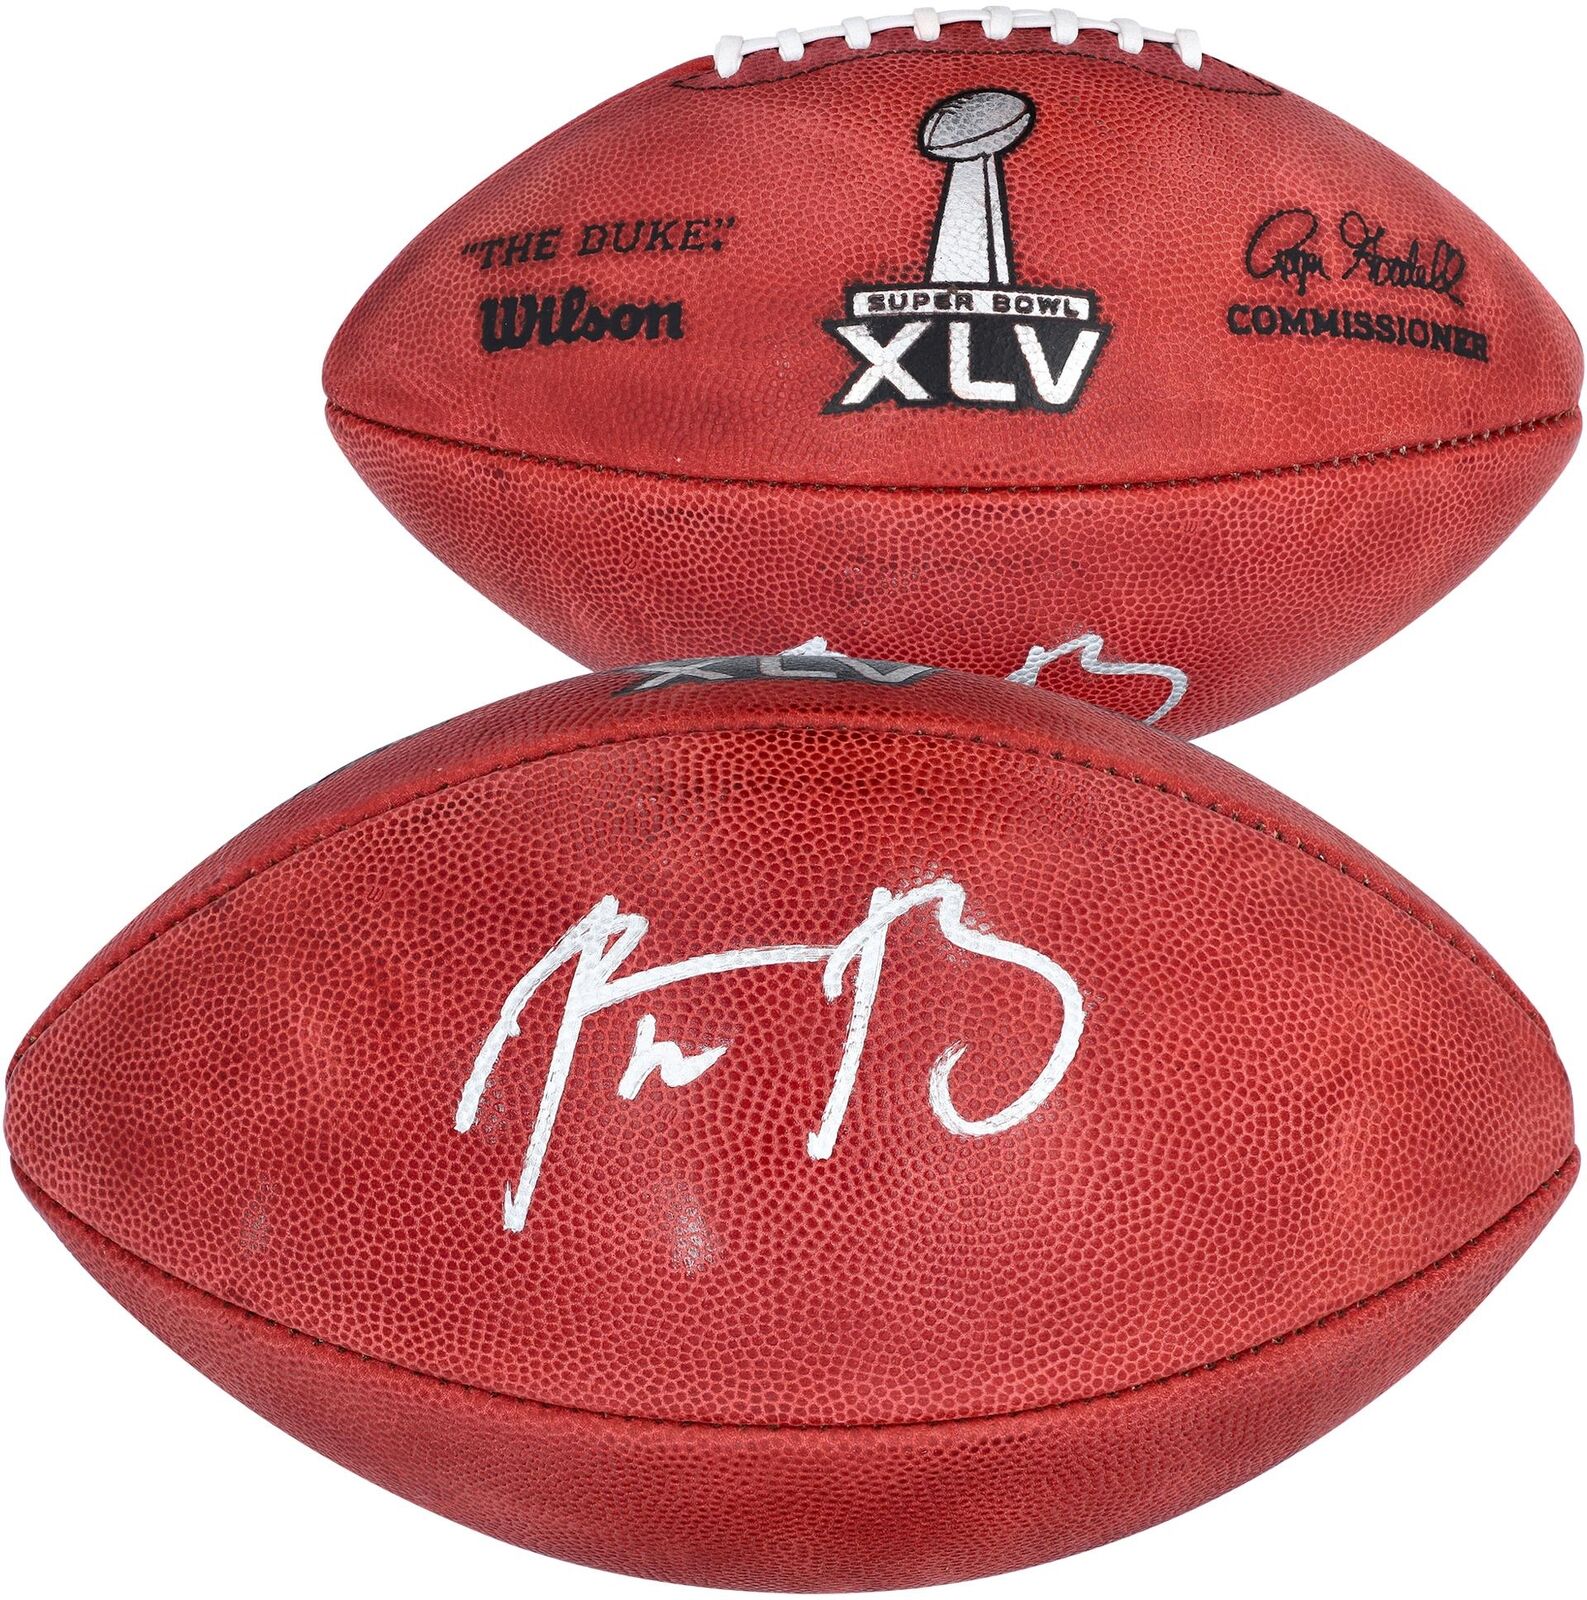 Aaron Rodgers Green Bay Packers Autographed Wilson Super Bowl Xlv Pro Football